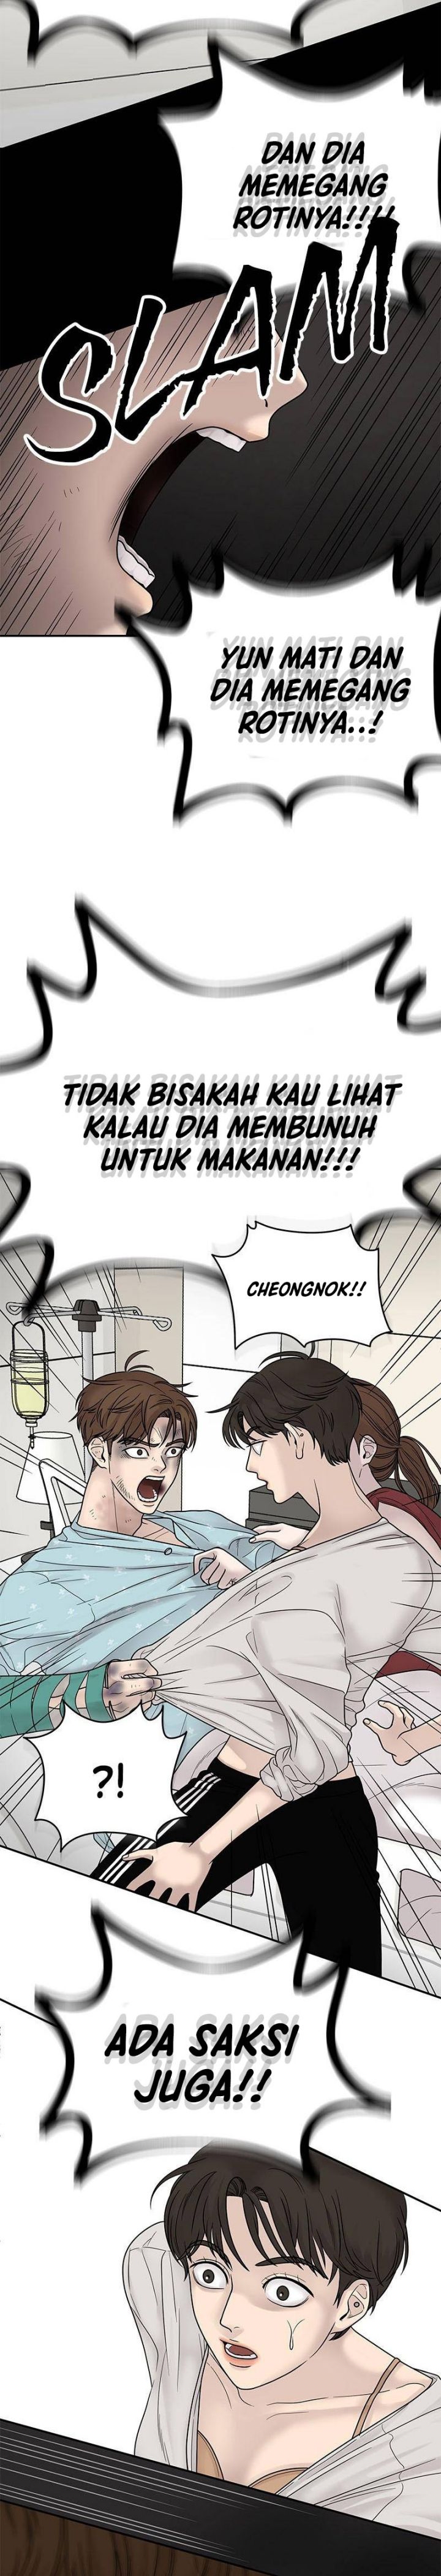 Chasing Spica Chapter 02 - 369